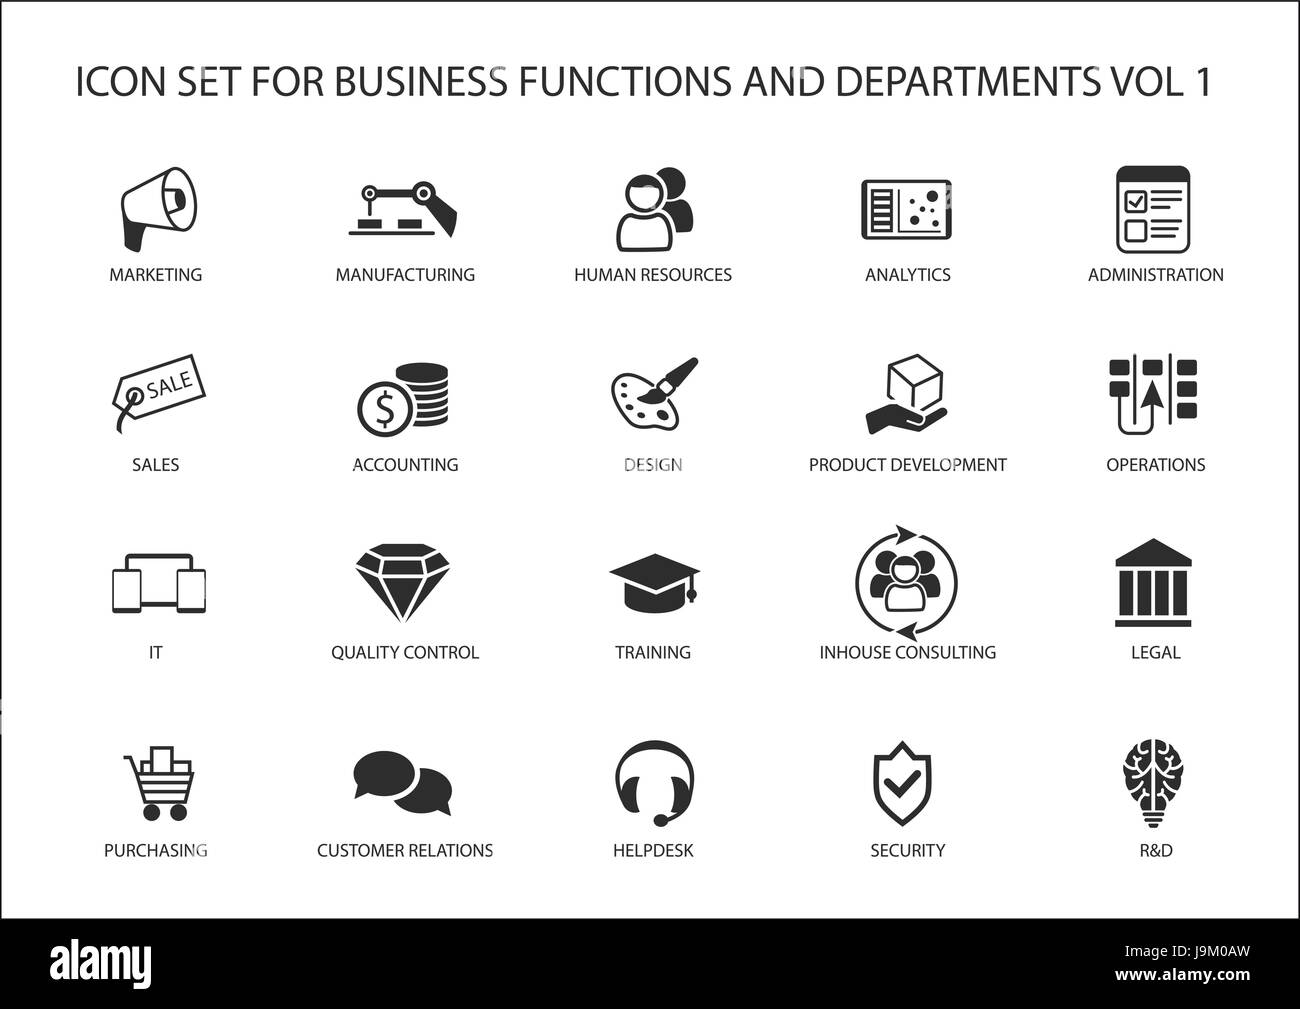 Various business functions and business department vector icons like sales, marketing, HR, R&D, purchasing, accounting and operations. Stock Vector